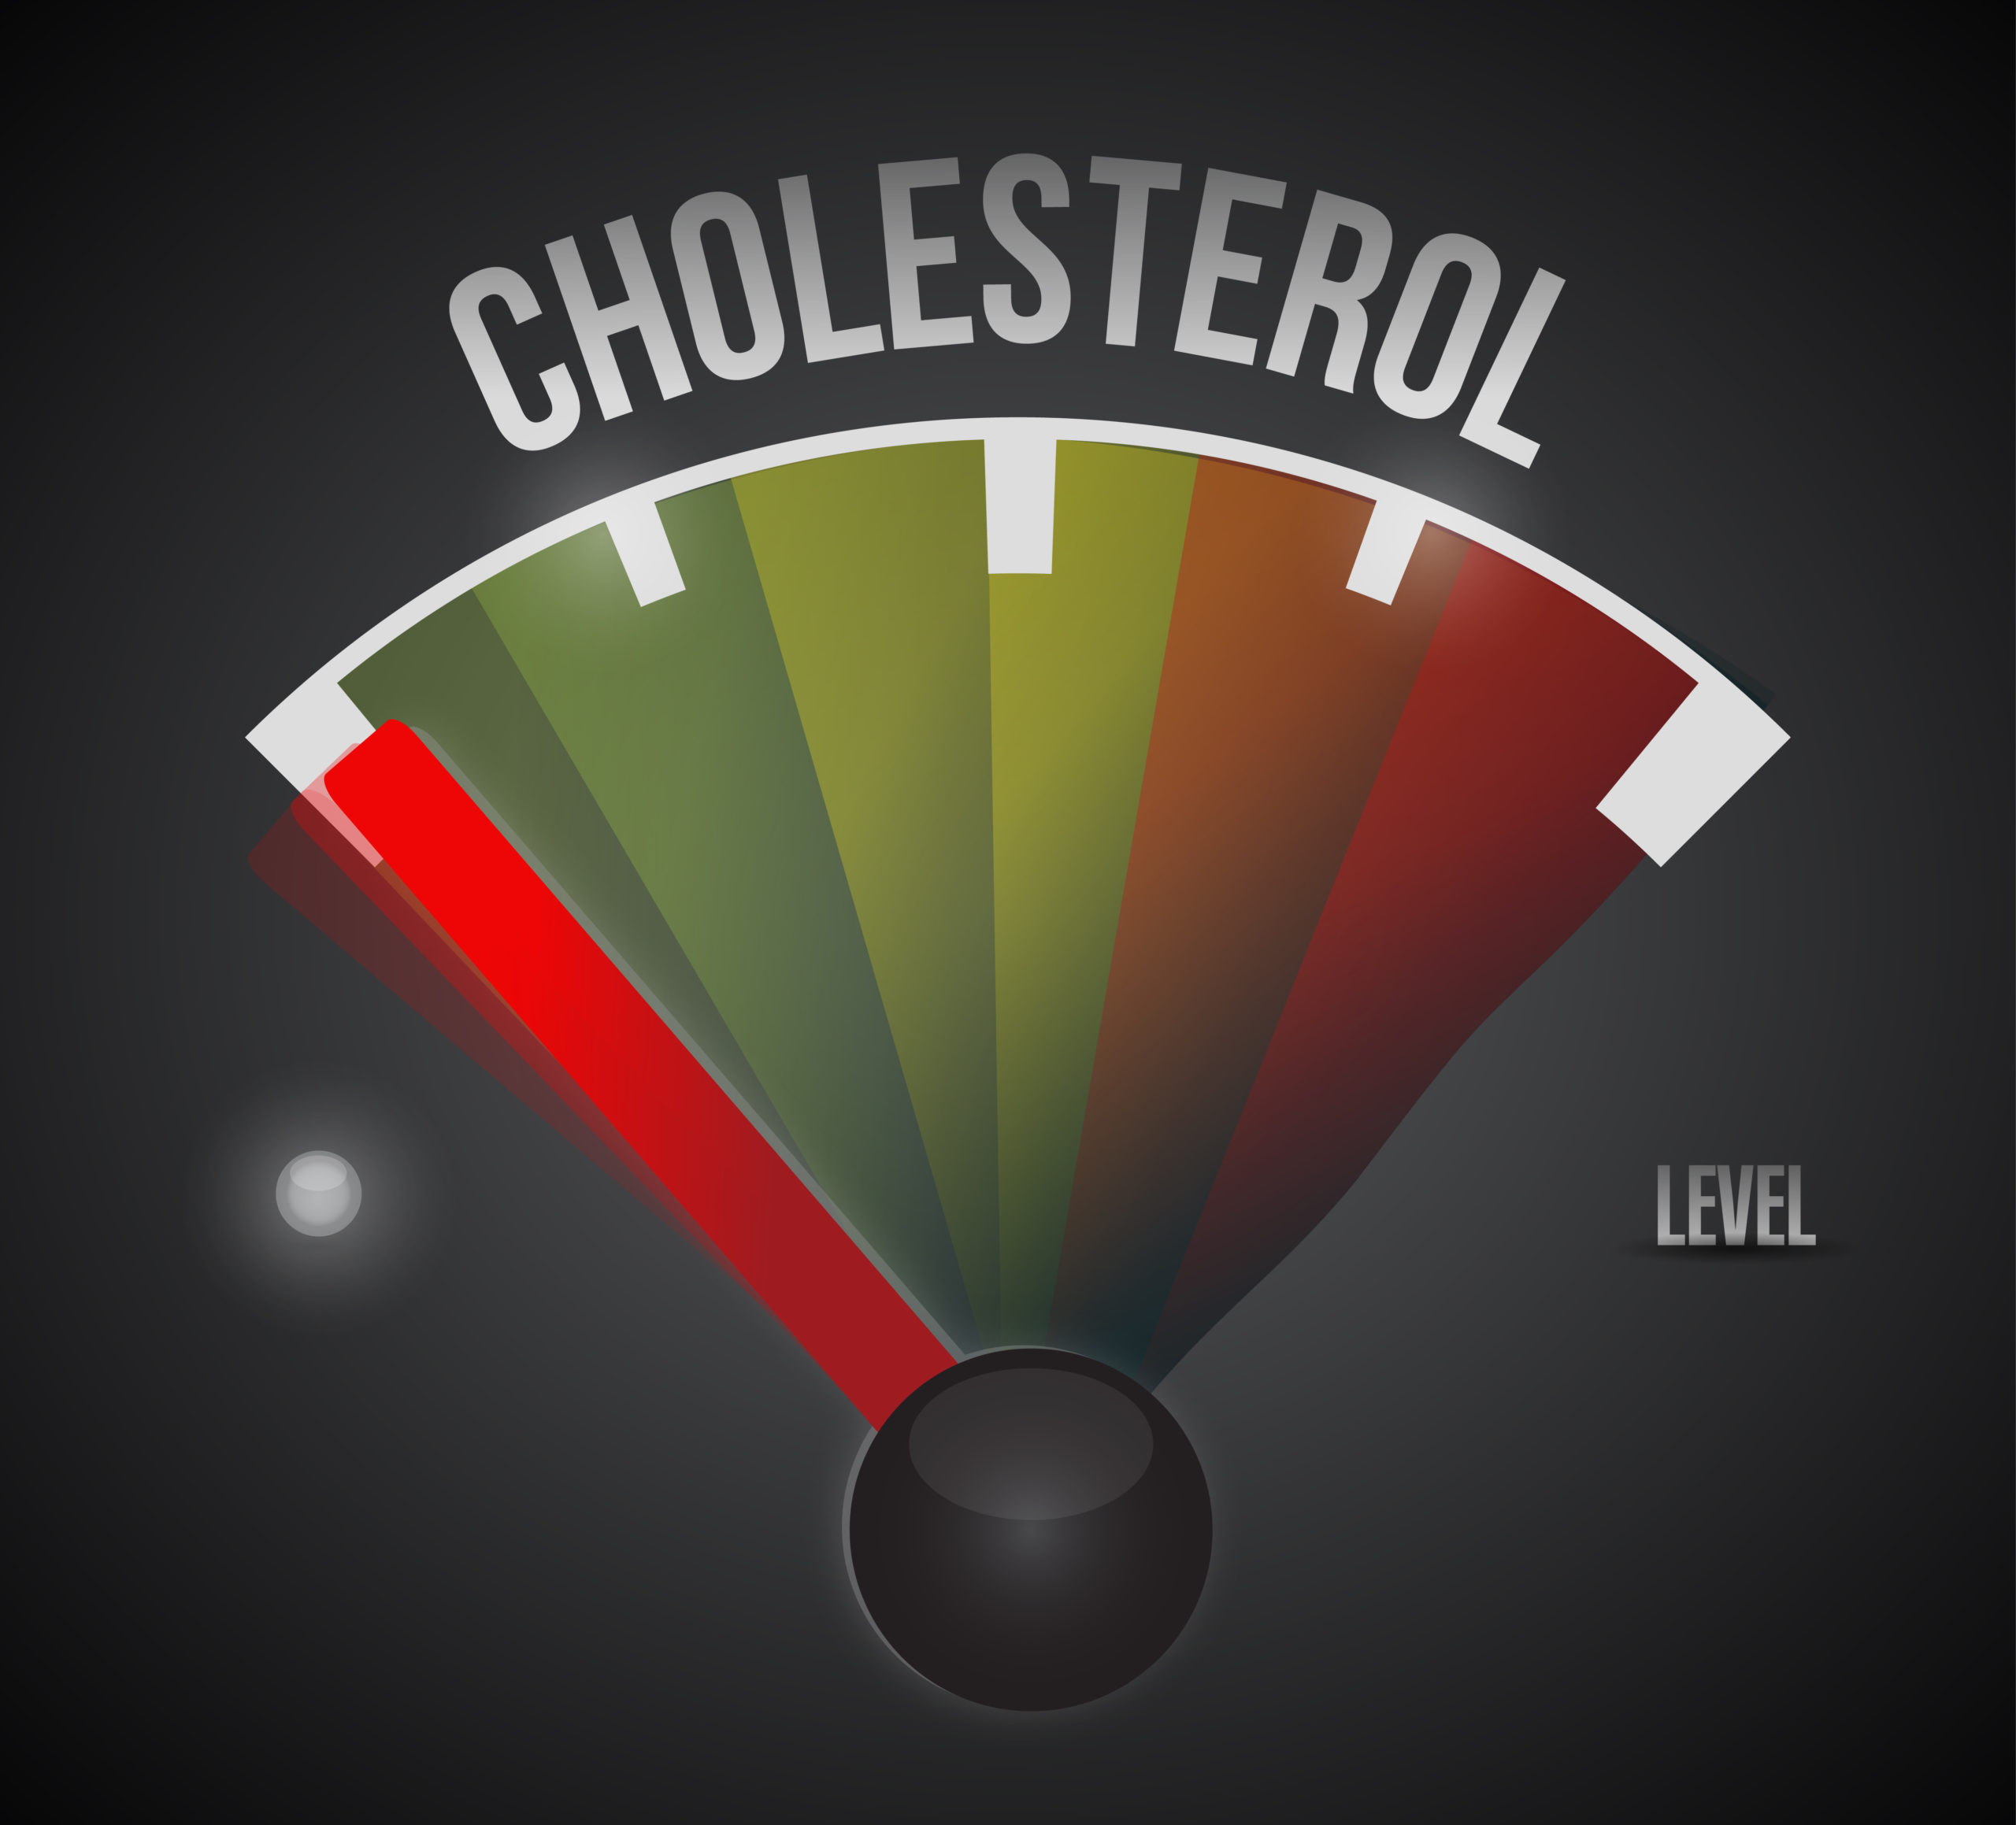 Low Cholesterol Scale